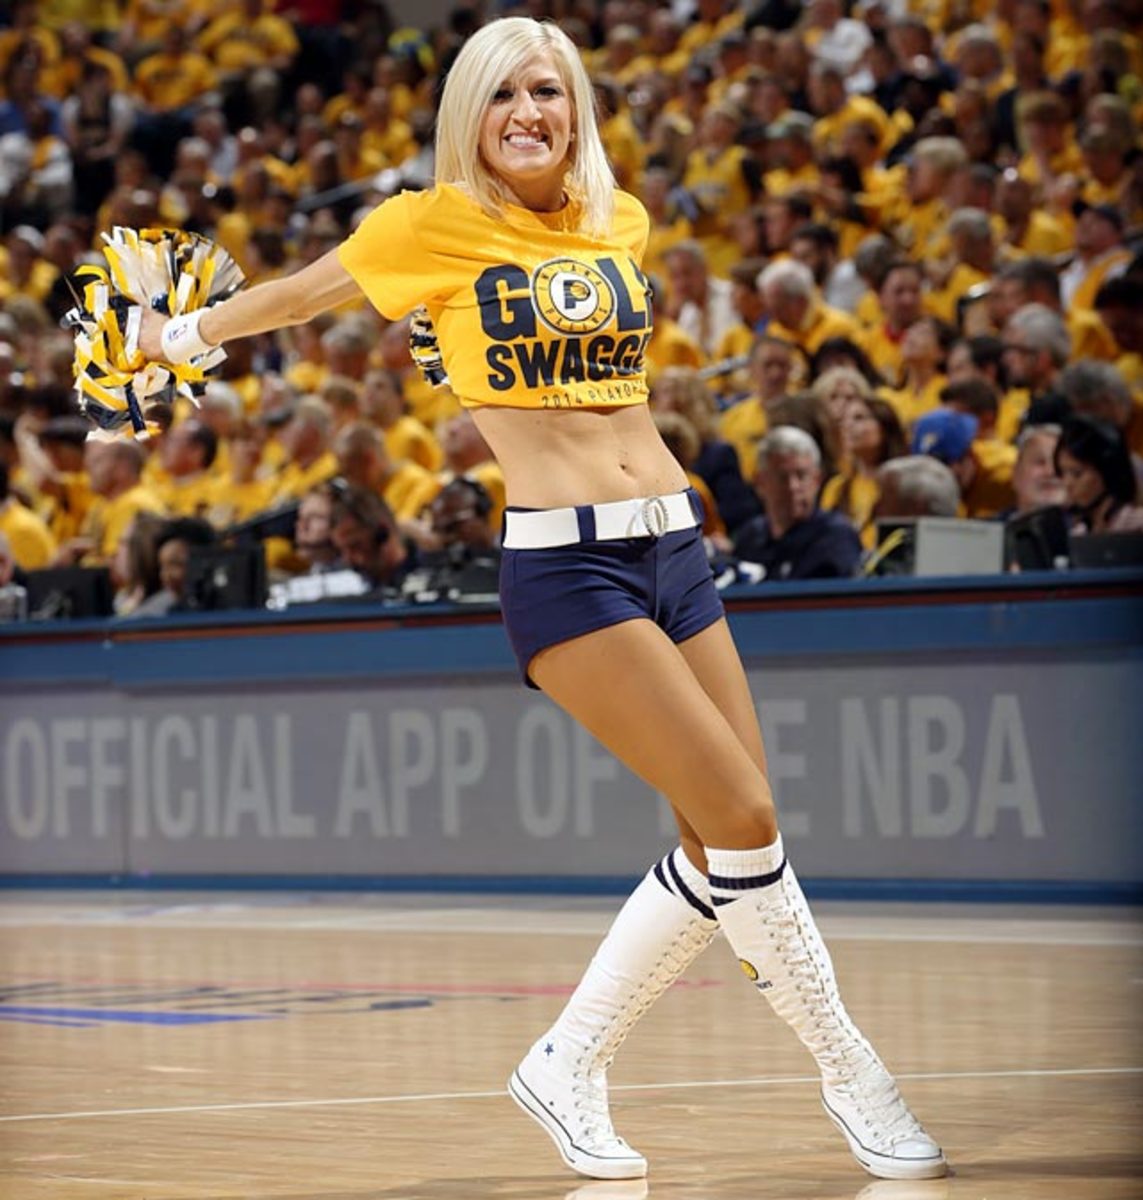 140512155850-indiana-pacers-pacemates-dancers-488353035-single-image-cut.jpg